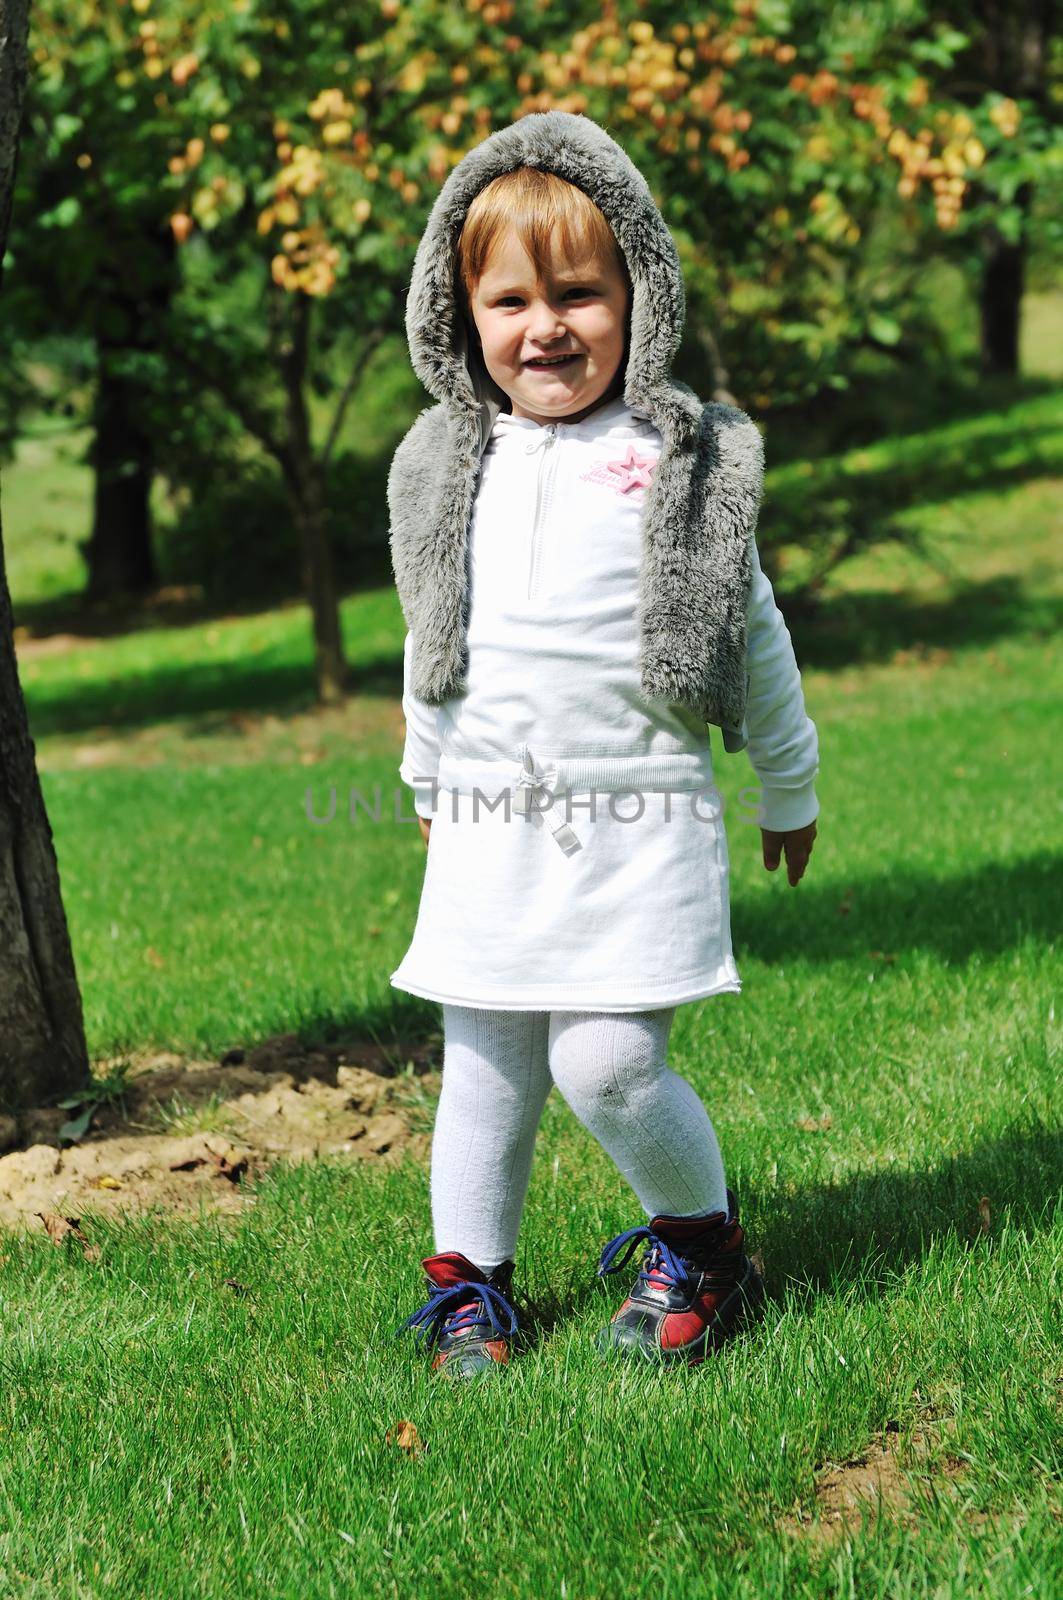 child fashion with beautiful little child outdoor in nature